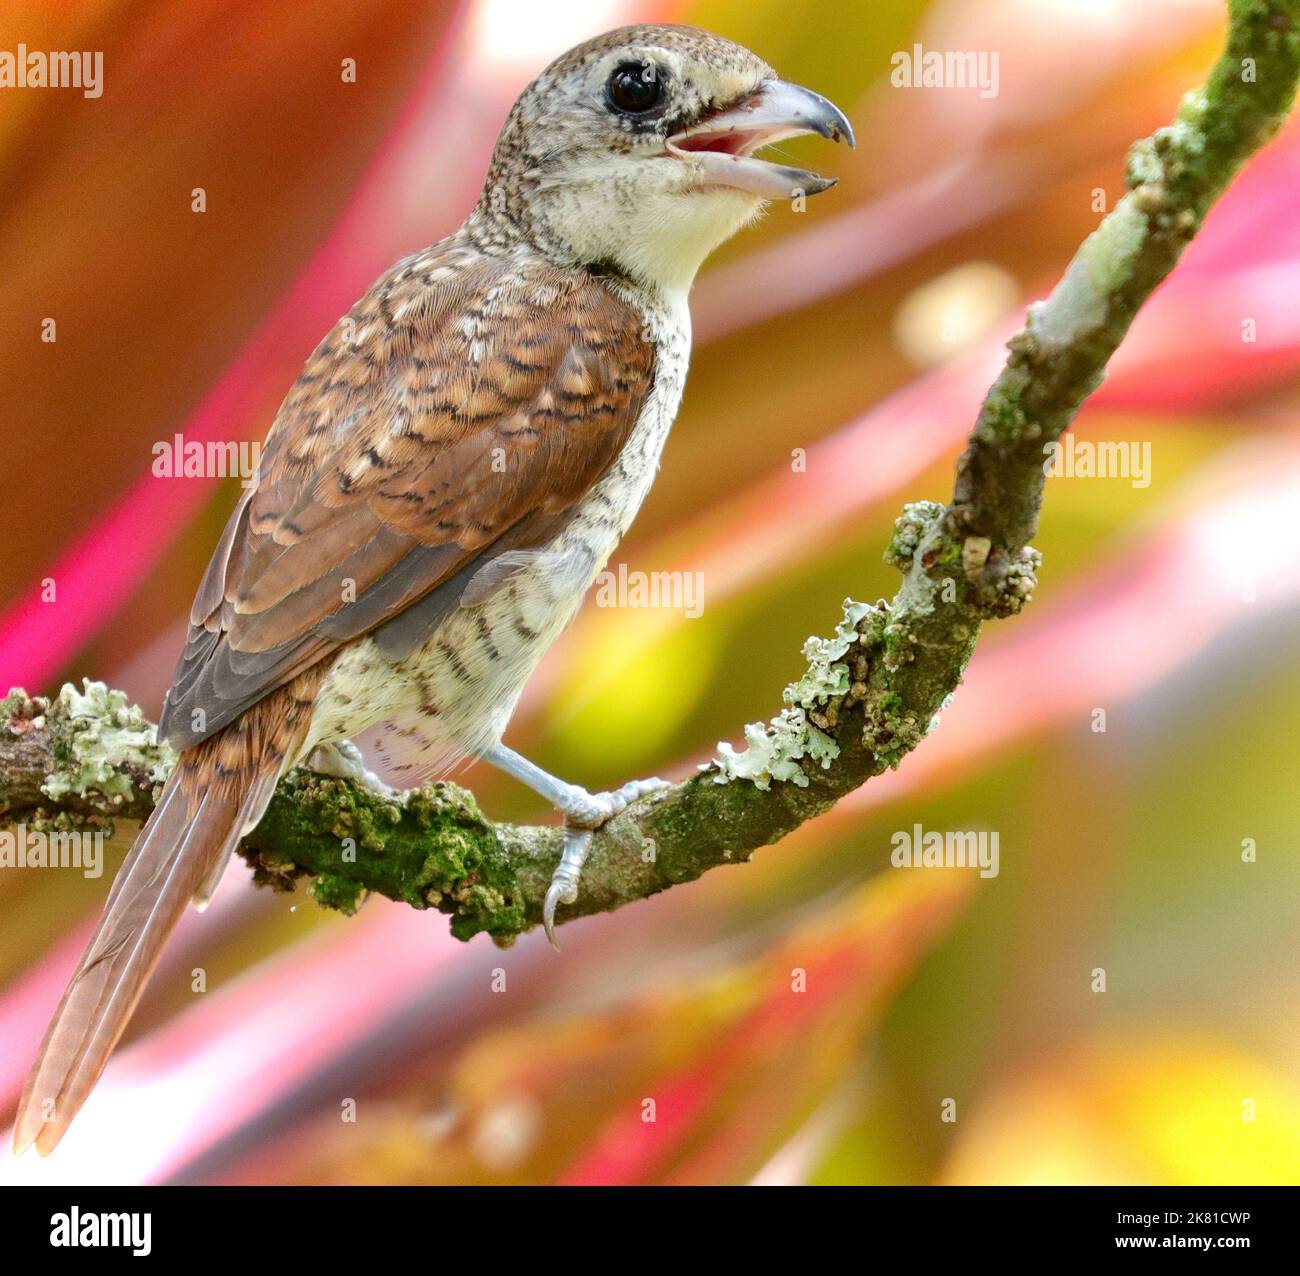 A closeup shot of a tiger shrike on the branch of a tree Stock Photo